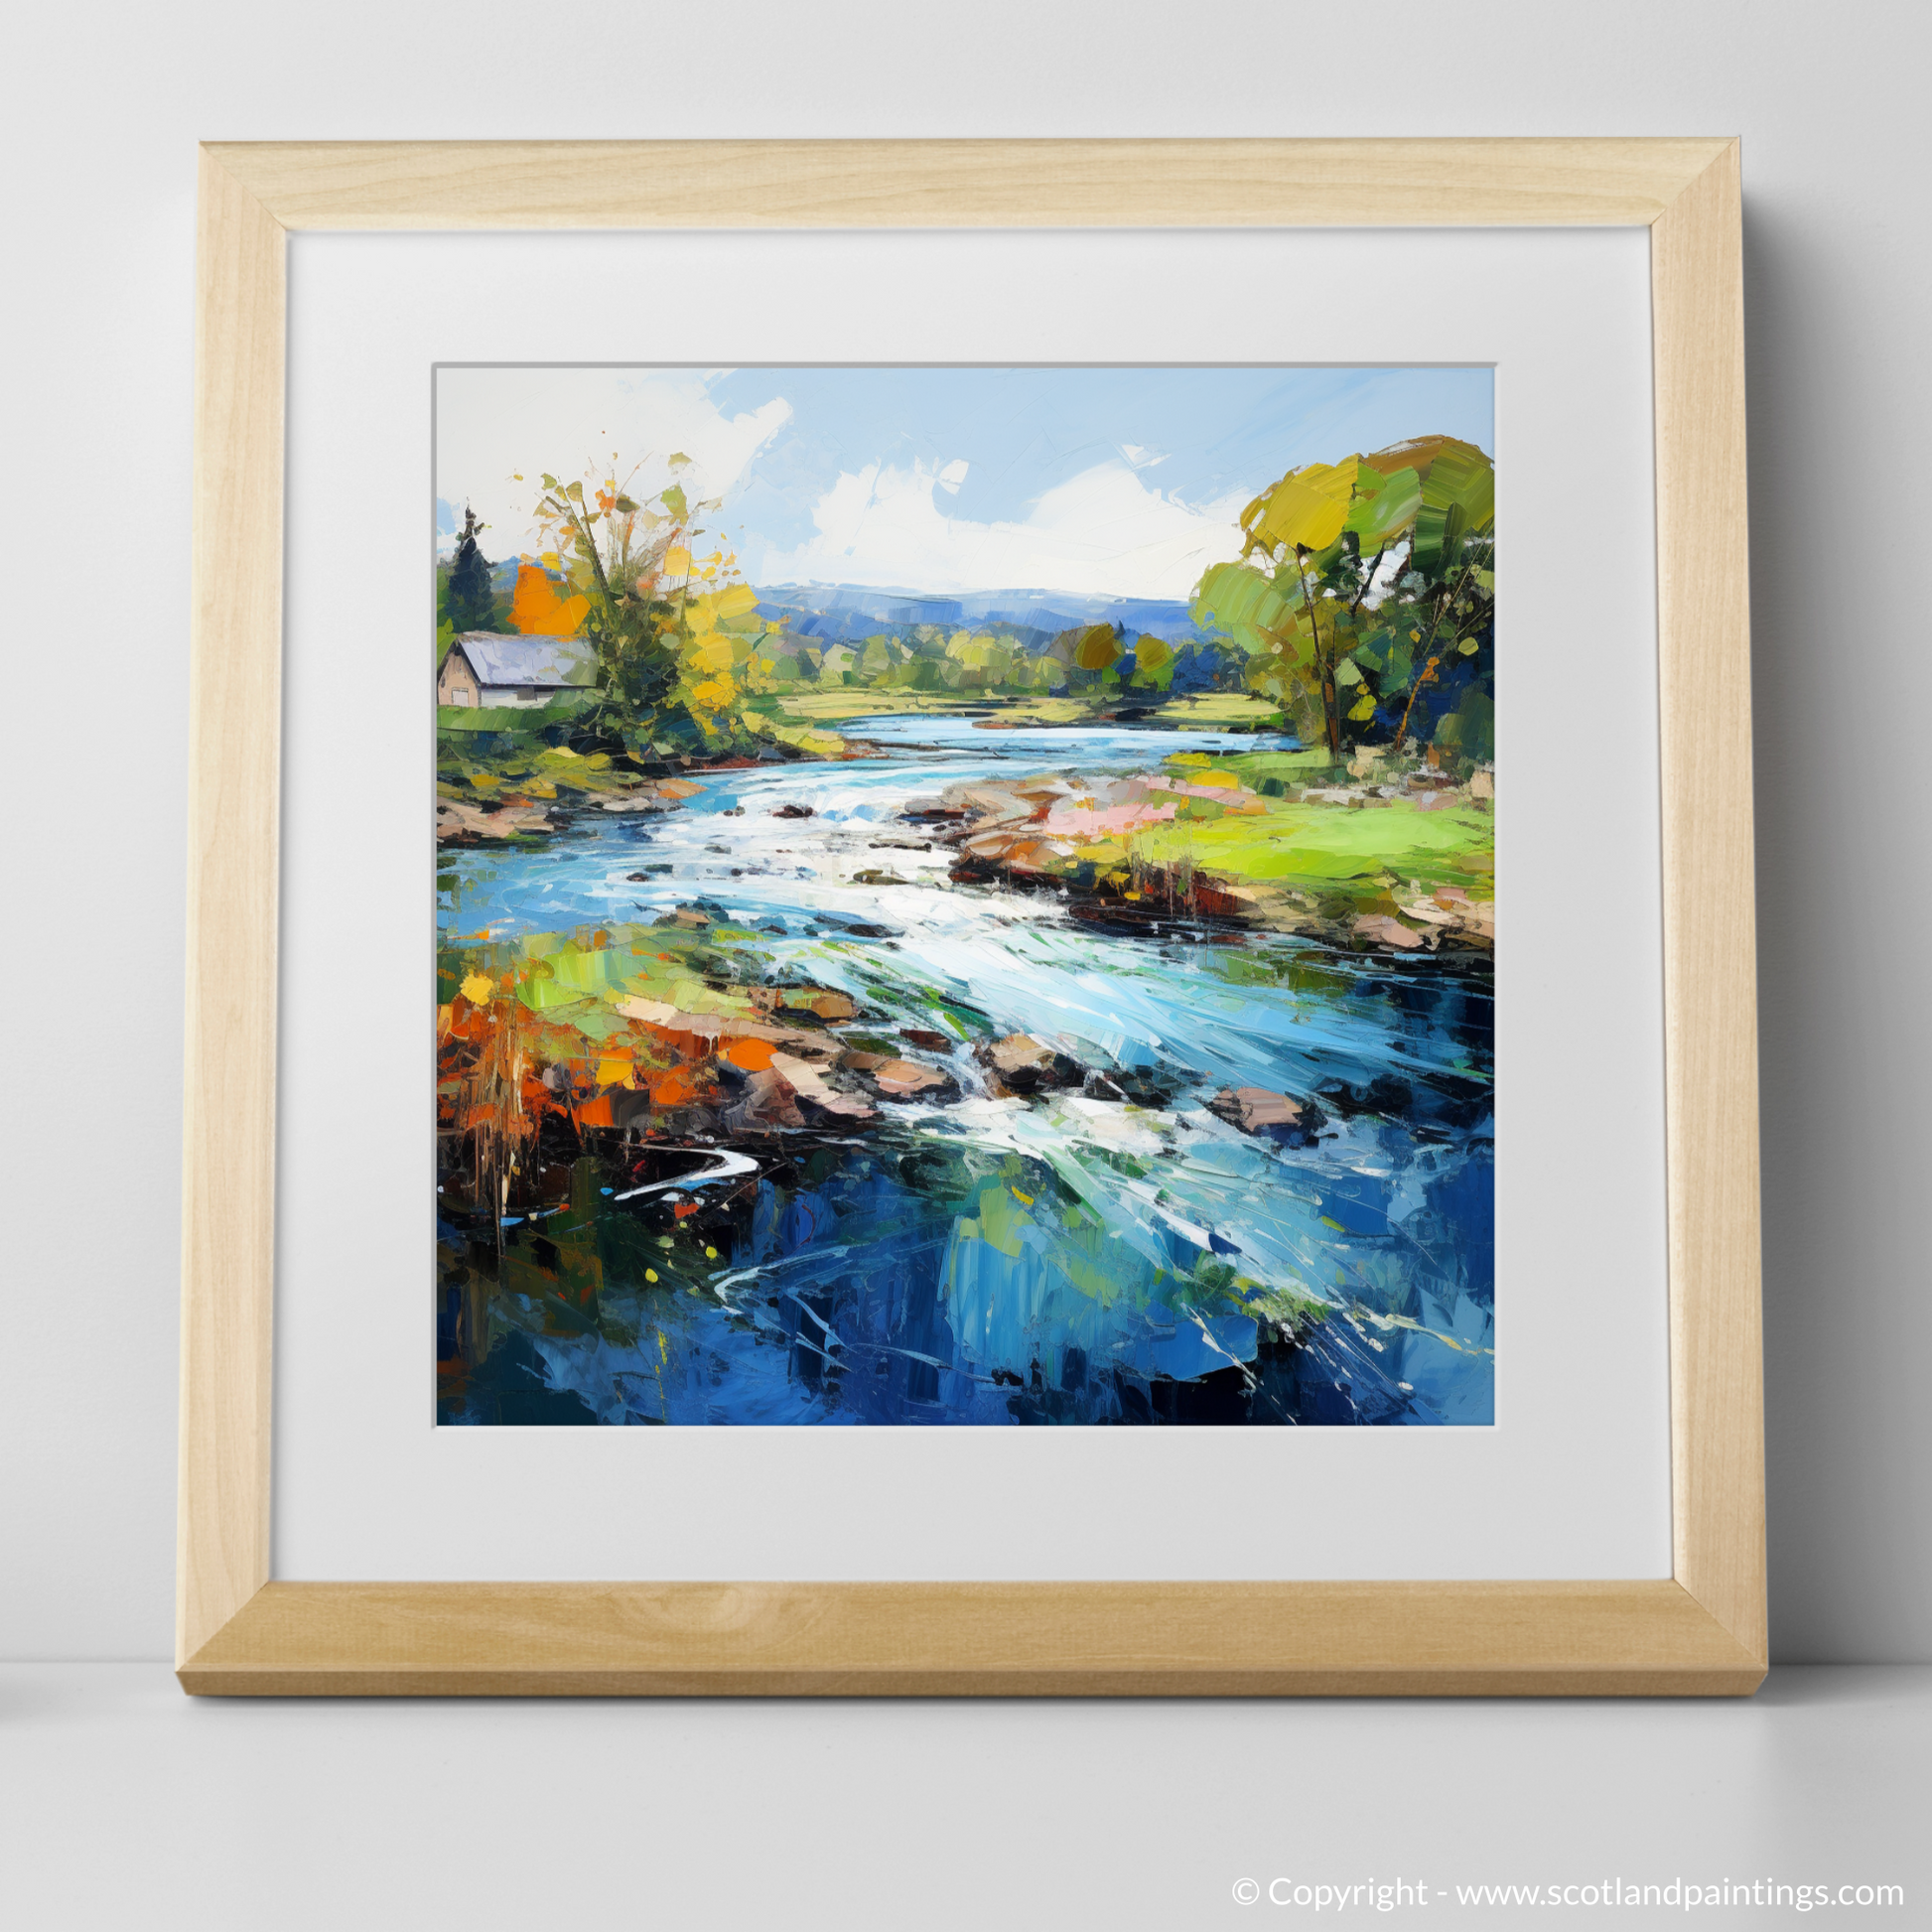 Art Print of River Leven, West Dunbartonshire with a natural frame